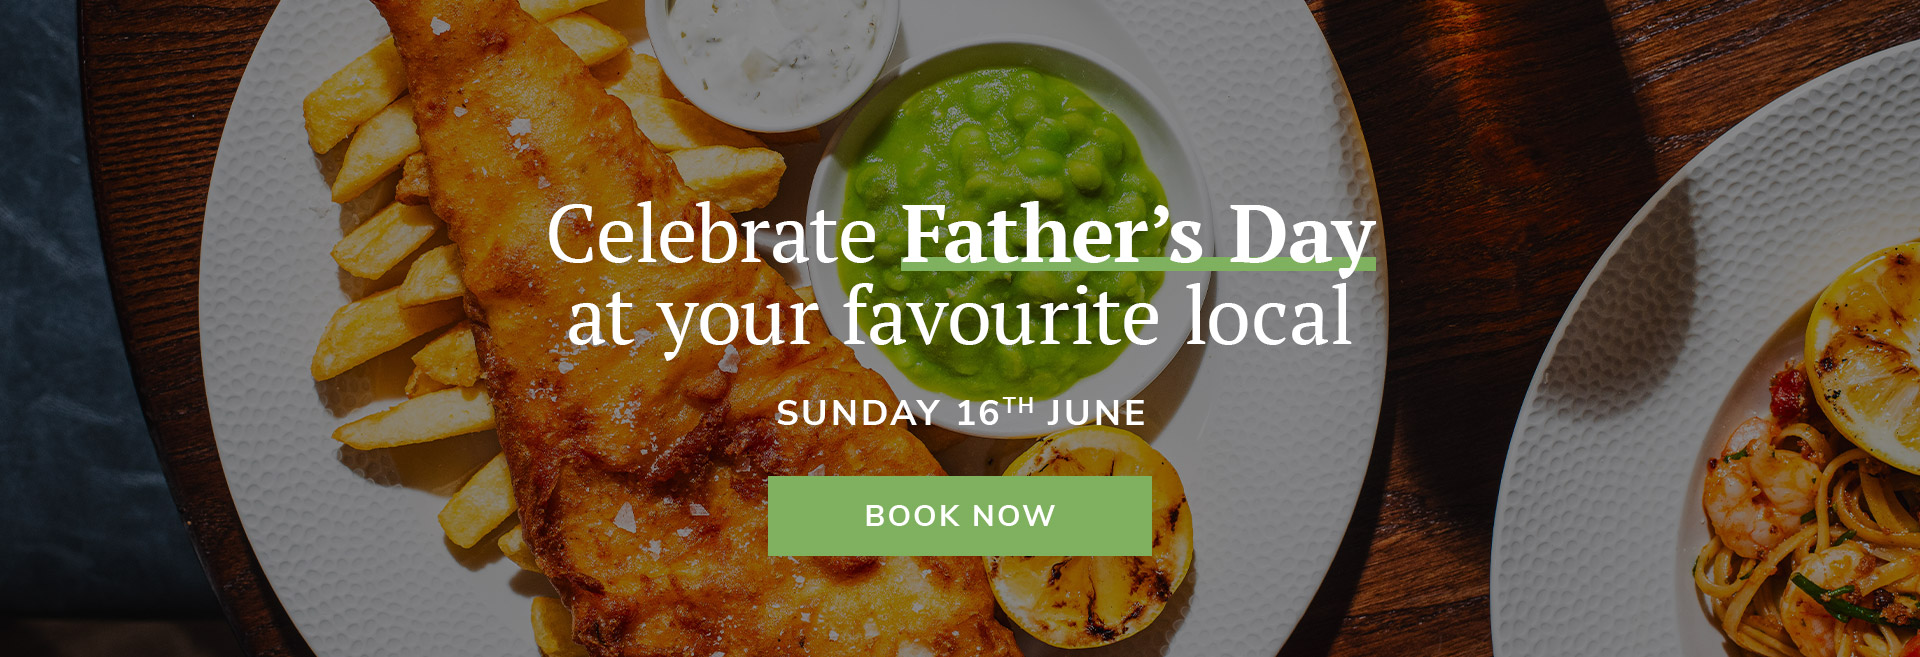 Father's Day at The White Horse Hotel